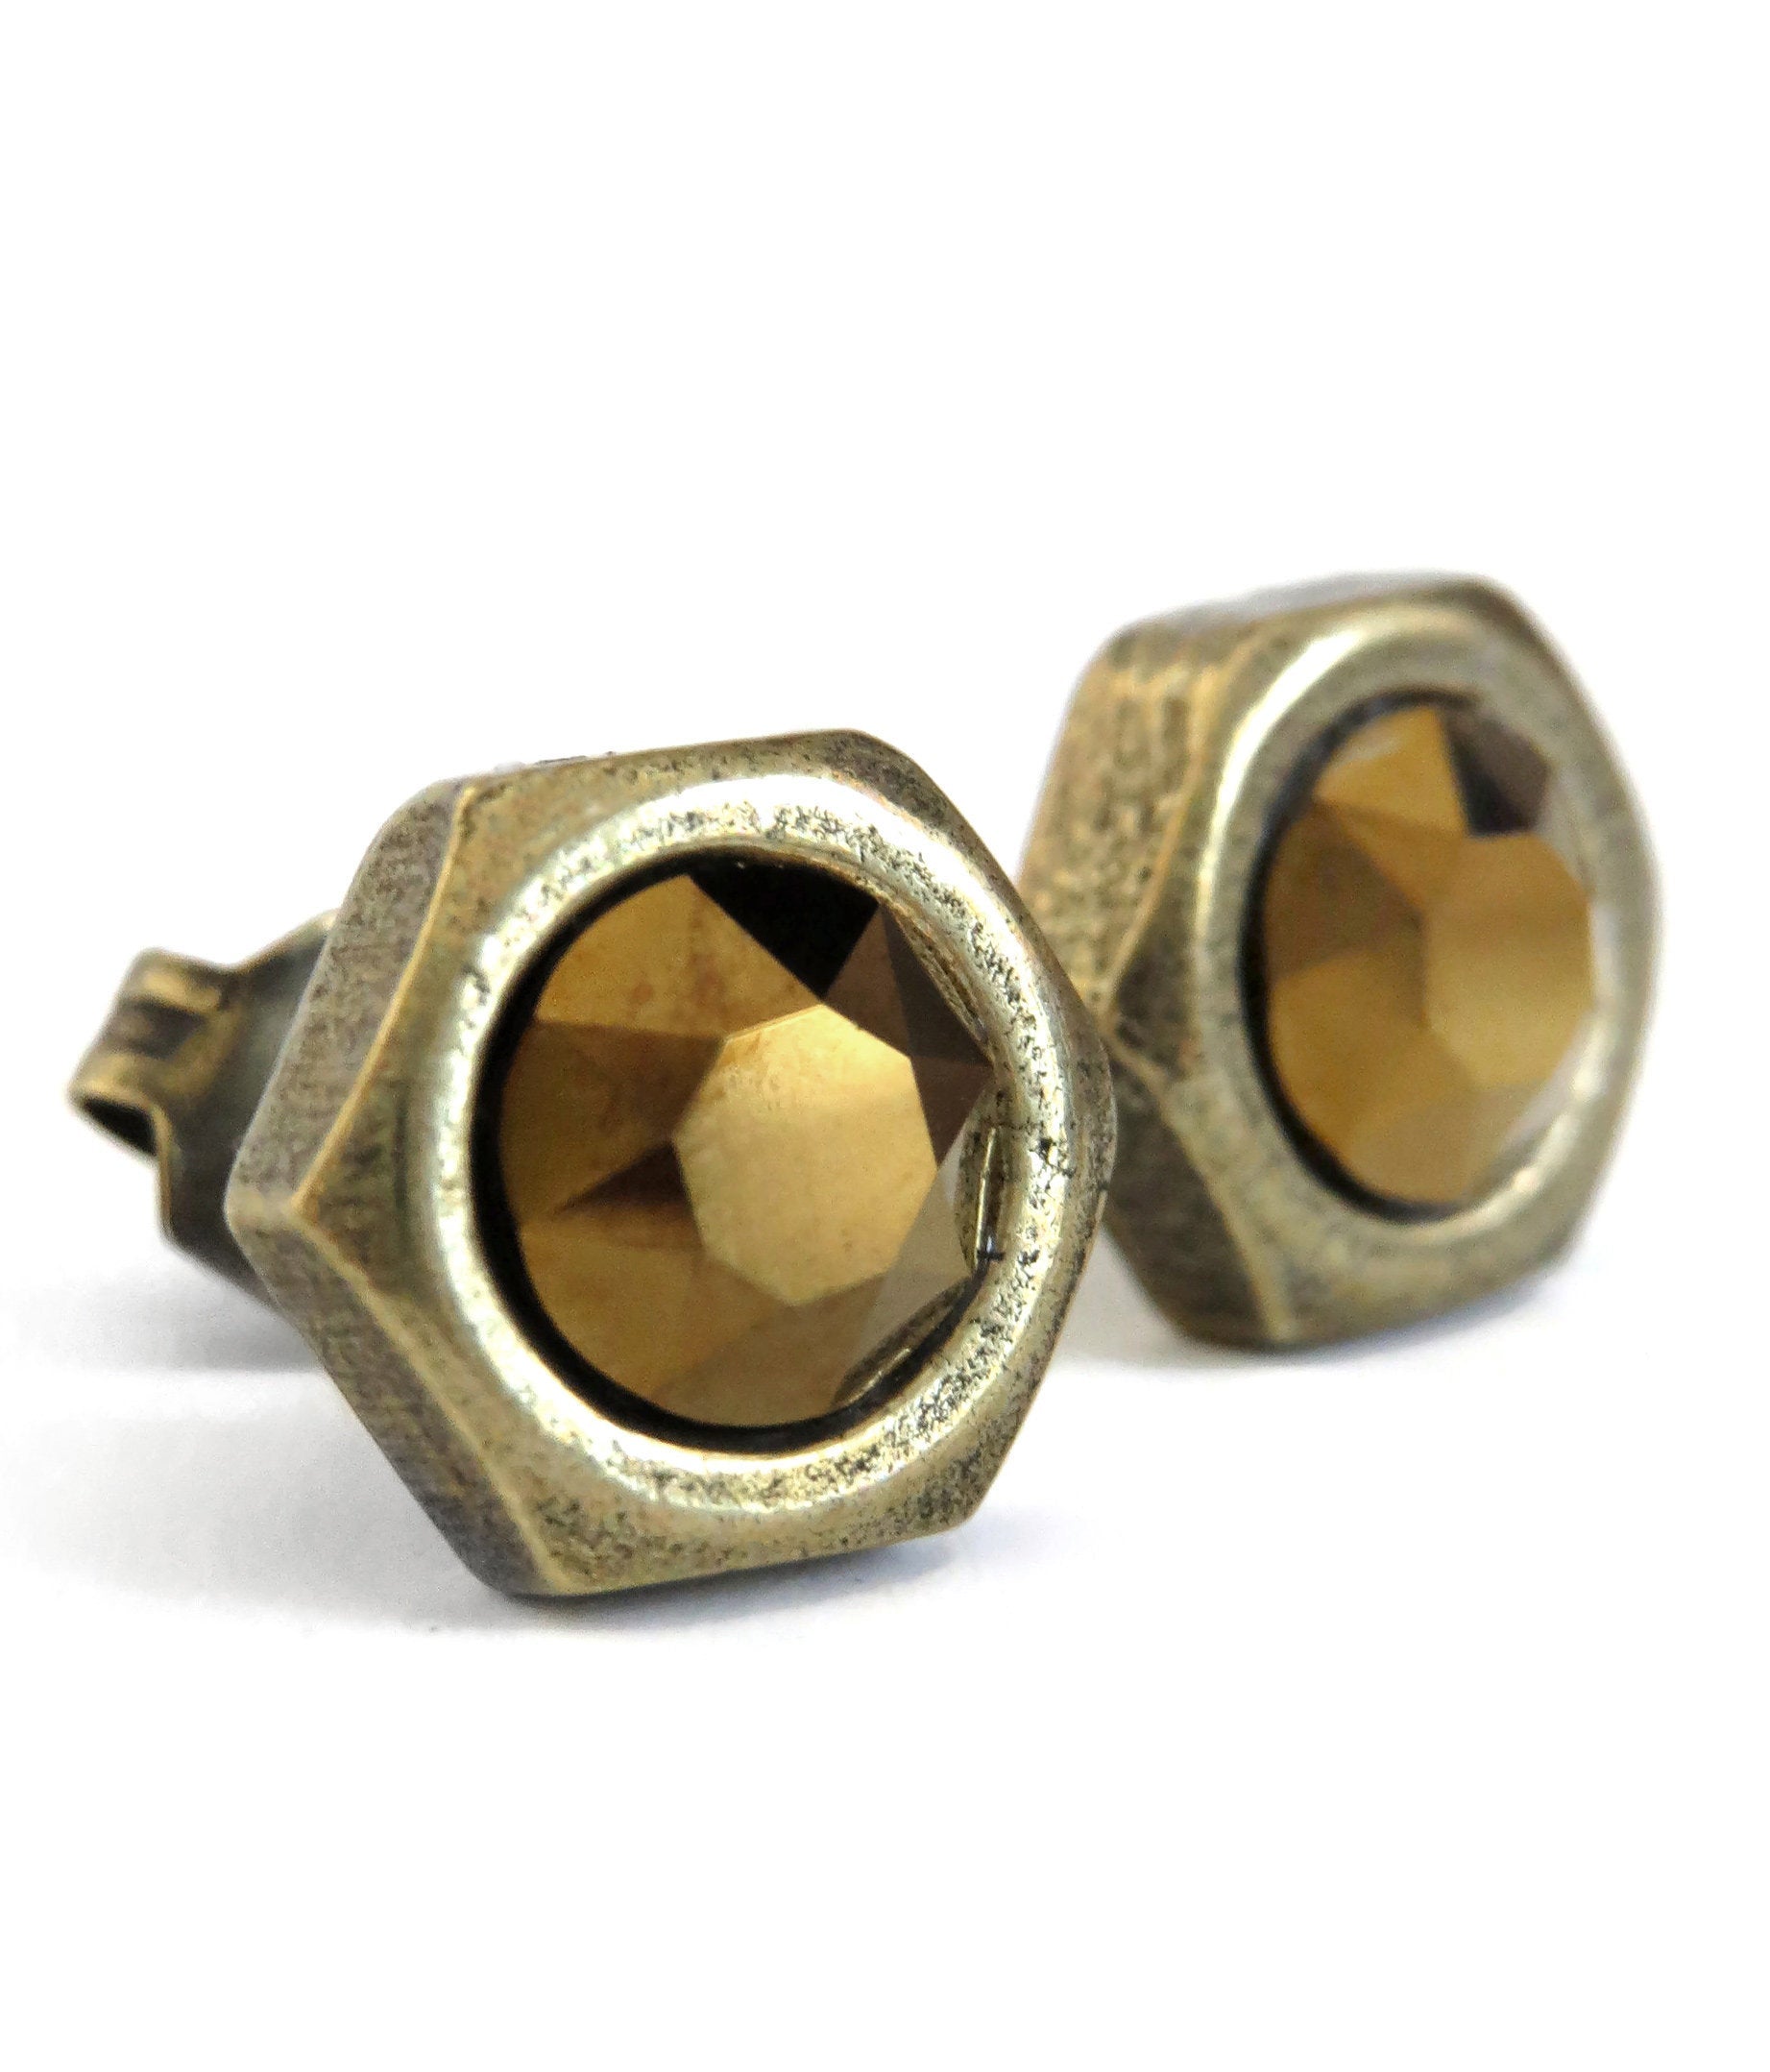 OLD GOLD - Mens Hex Nut Stud Earrings with Metallic Gold Crystal